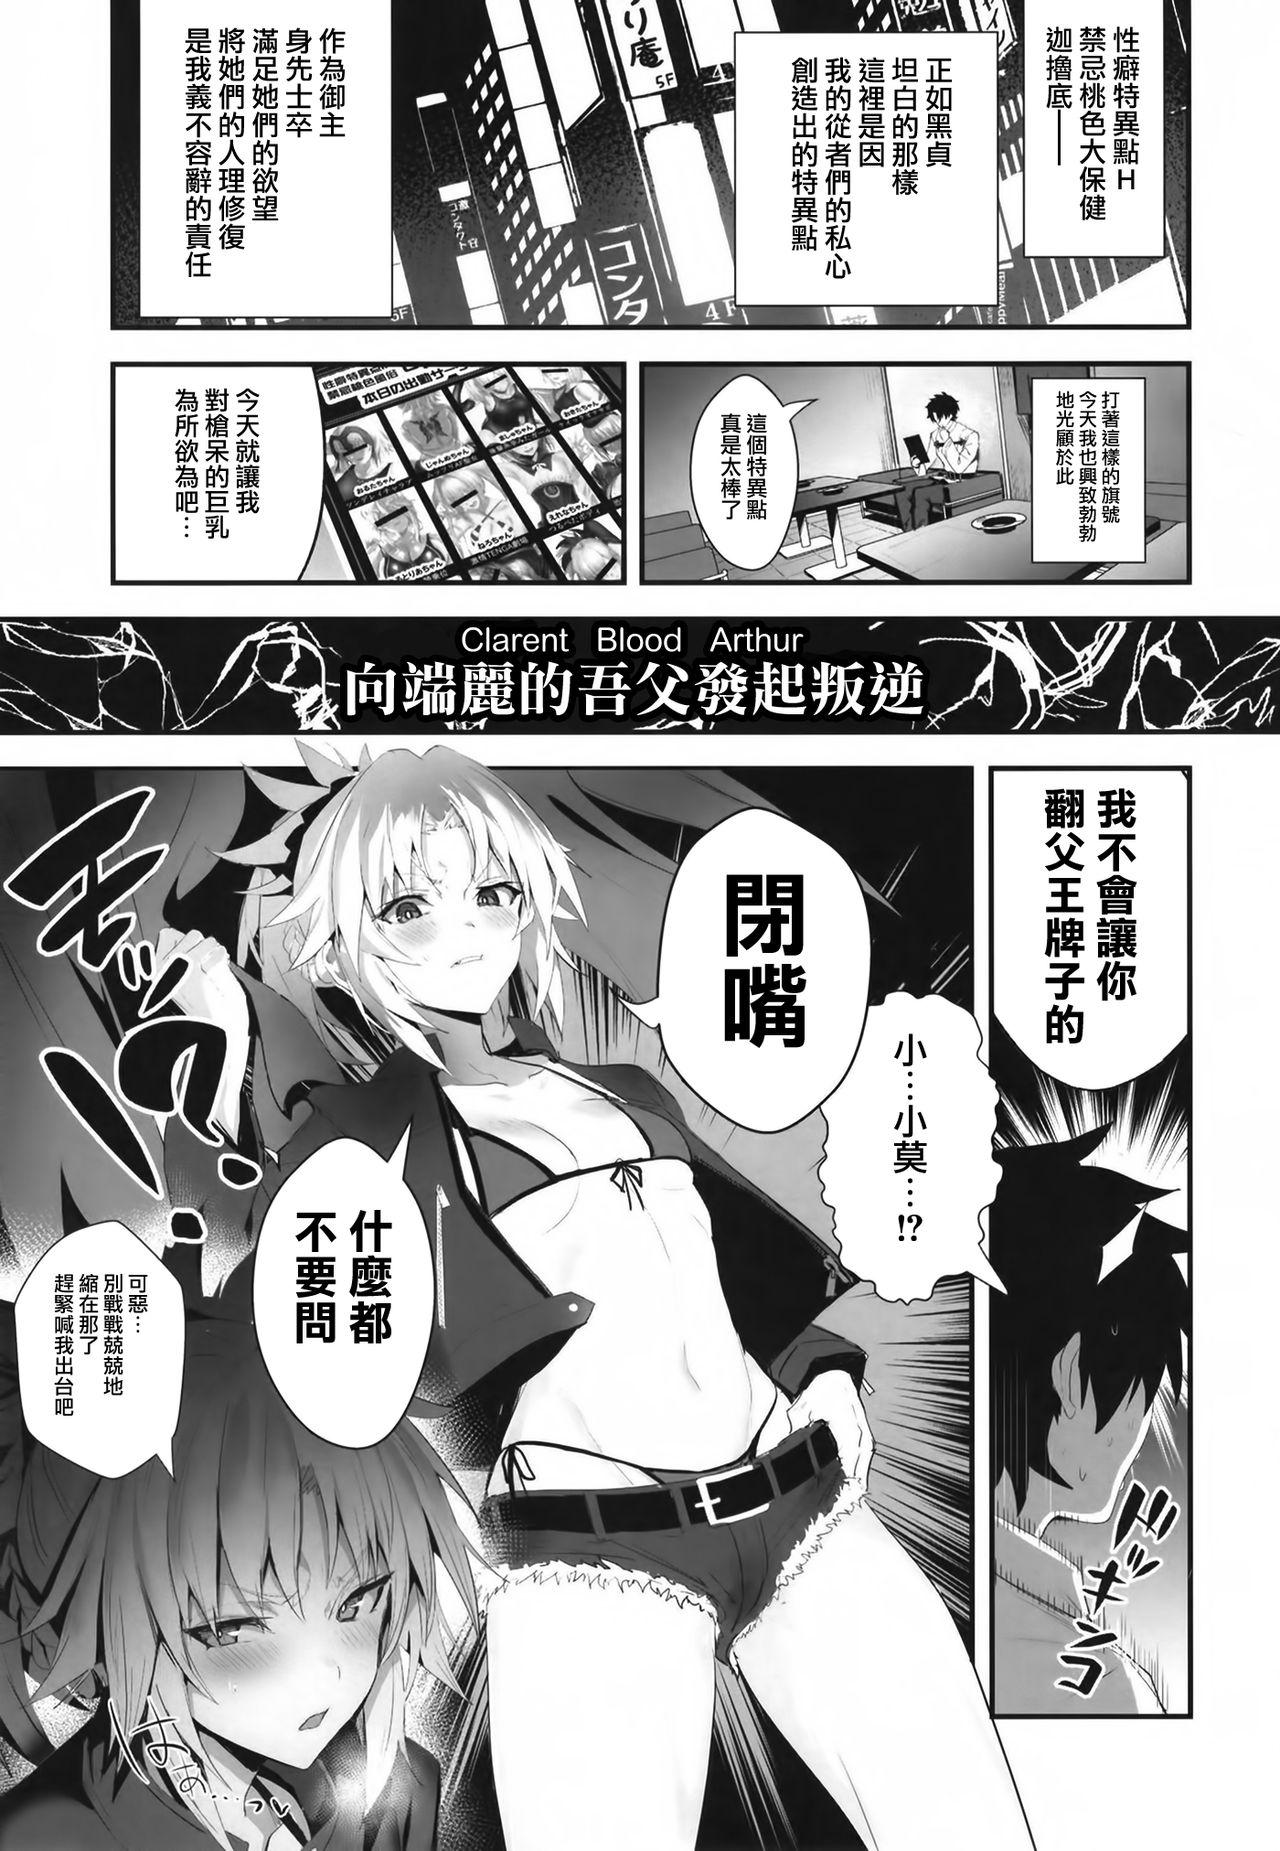 Role Play SUKEBE Order VOL. 02 - Fate grand order Hardcorend - Page 3